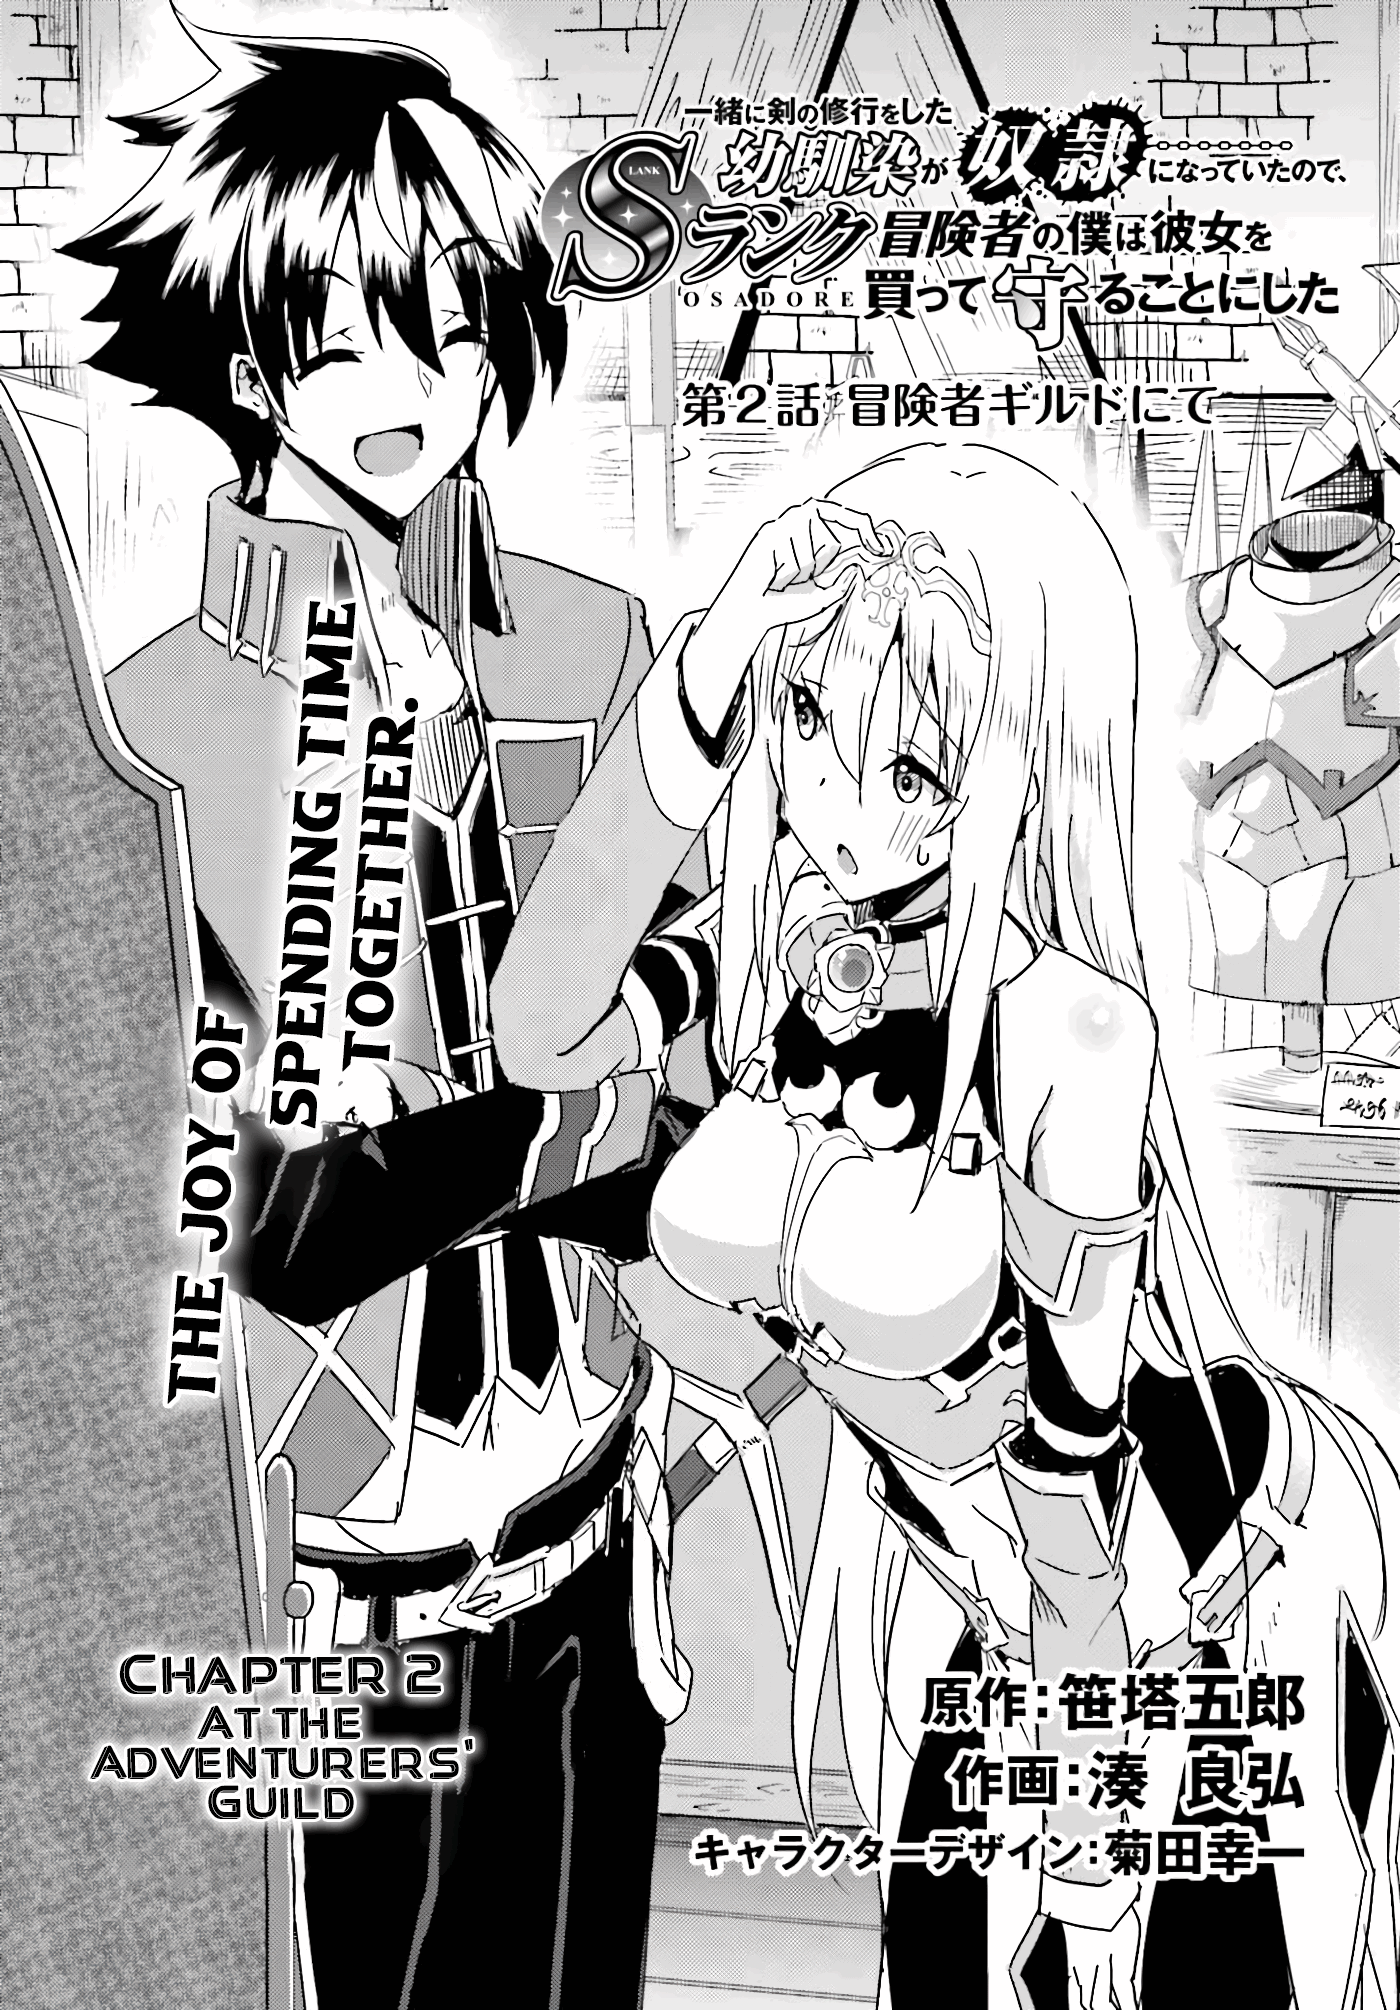 My Childhood Friend Who I Used To Train Swordsmanship With Became A Slave, So I, As An S-Rank Adventurer Decided To Buy Her And Protect Her. - Page 2